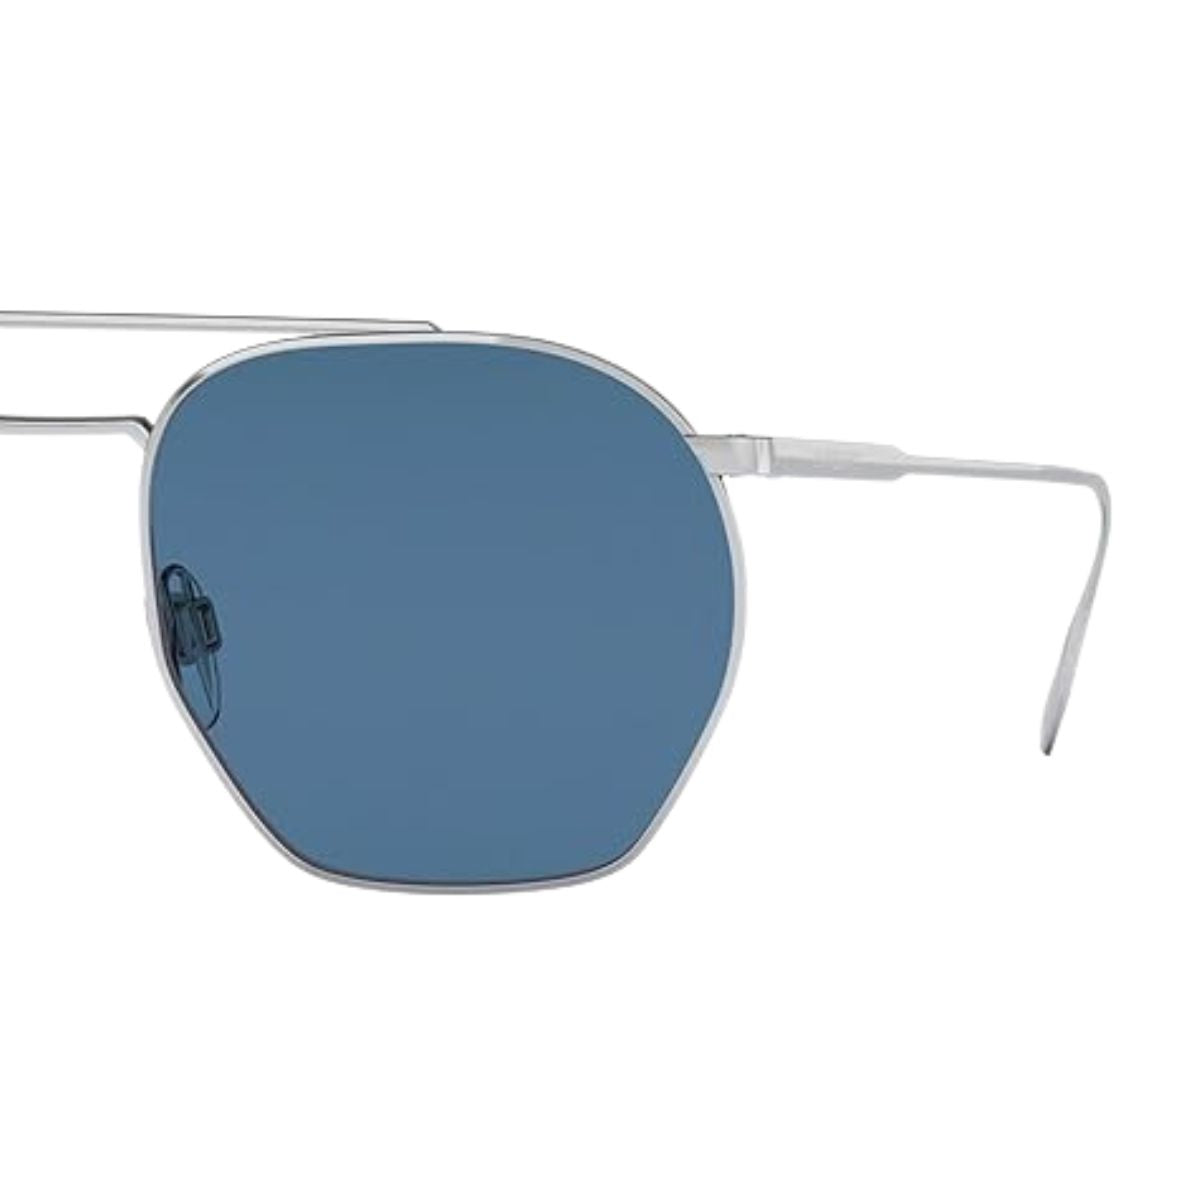 "E-commerce website page featuring Burberry 3126 sunglasses for men at Optorium, offering the best online price and highlighting the product’s features and availability in dark blue."